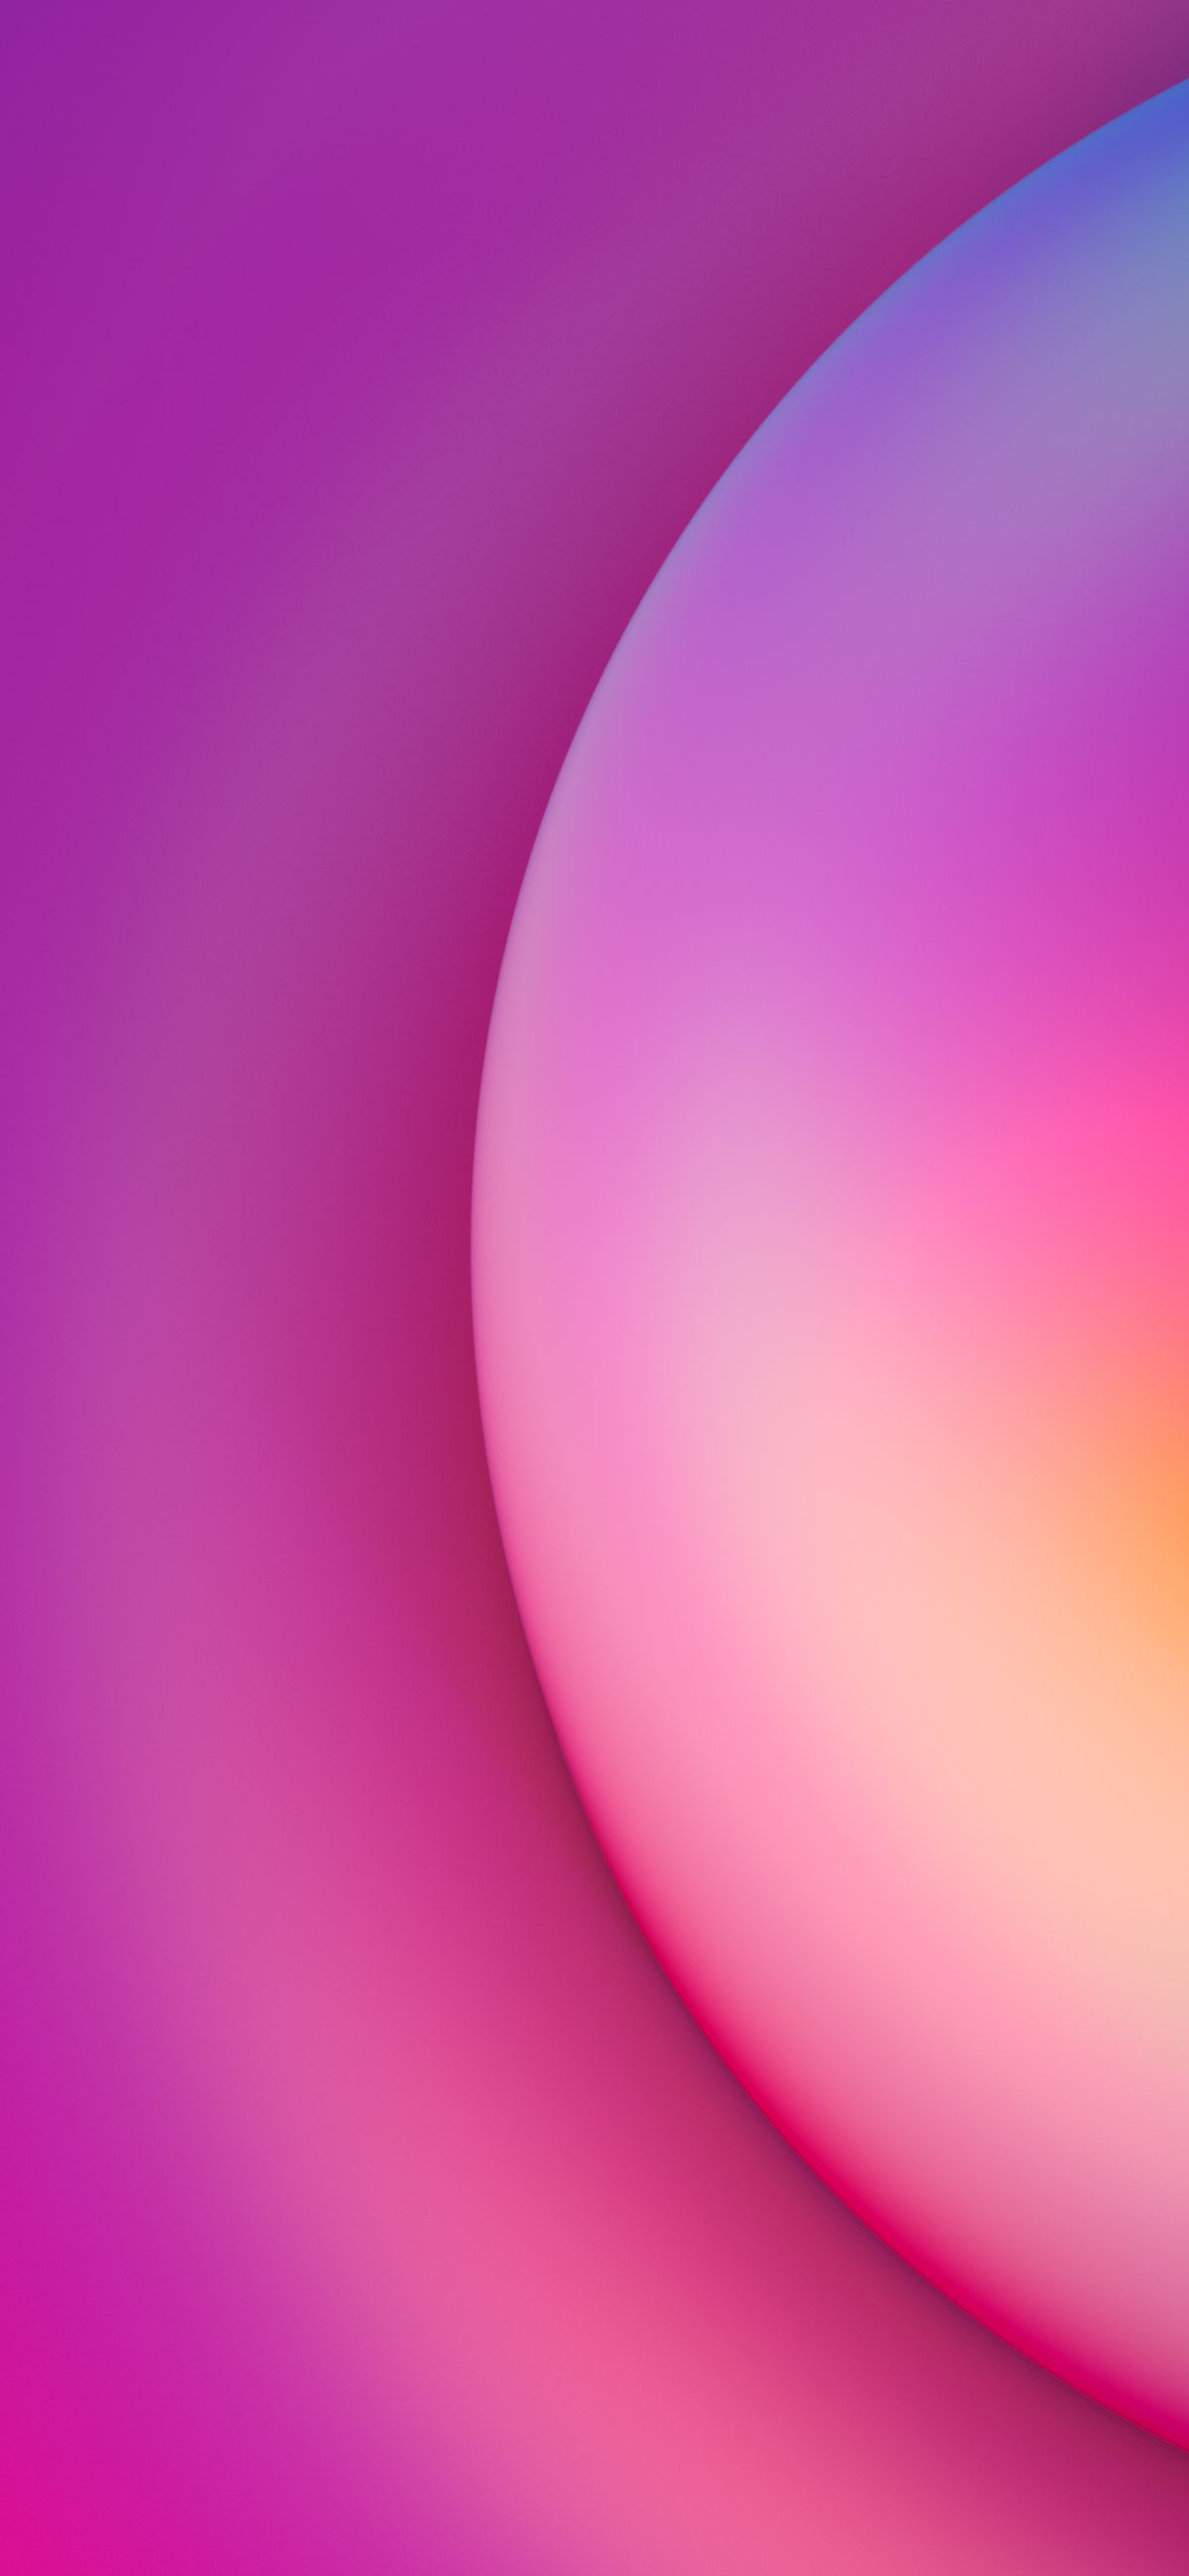 Abstract iPhone Wallpapers Created by Facebook's Design Team